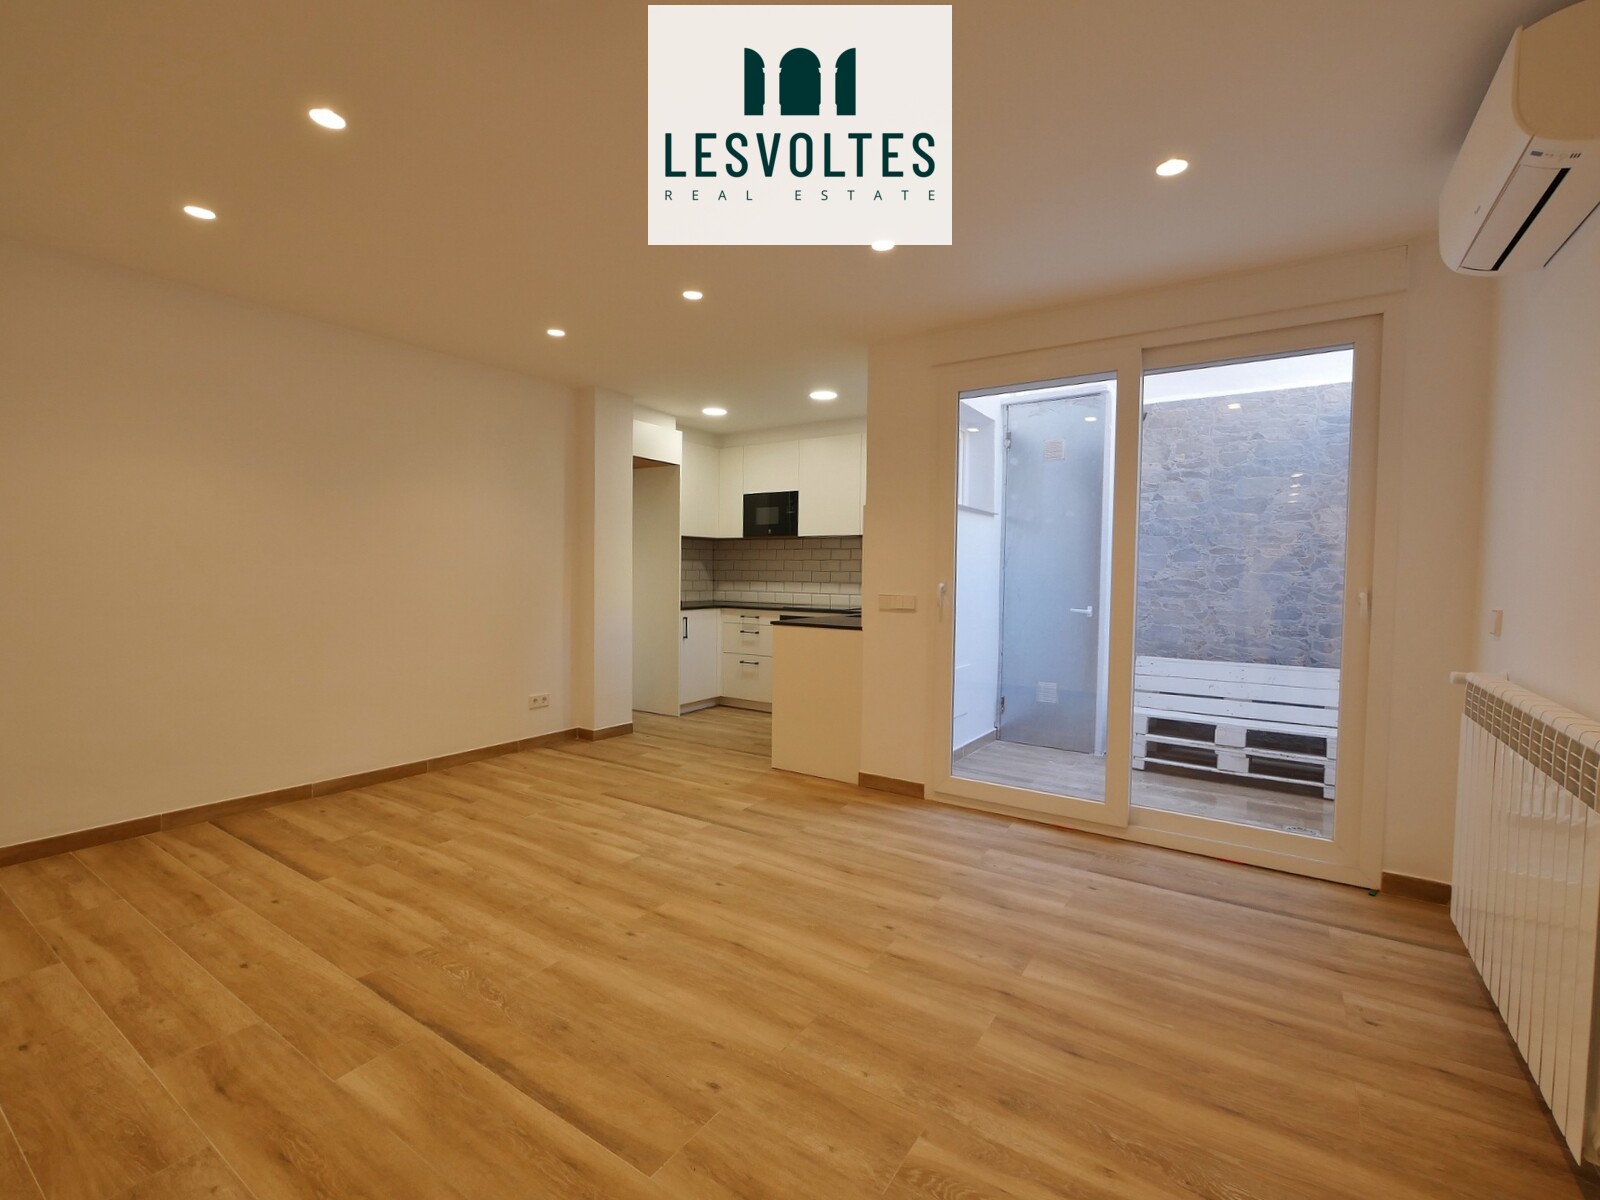 IMPECCABLE BRAND NEW GROUND FLOOR APARTMENT OF 90 M2 IN THE CENTER OF PALAFRUGELL